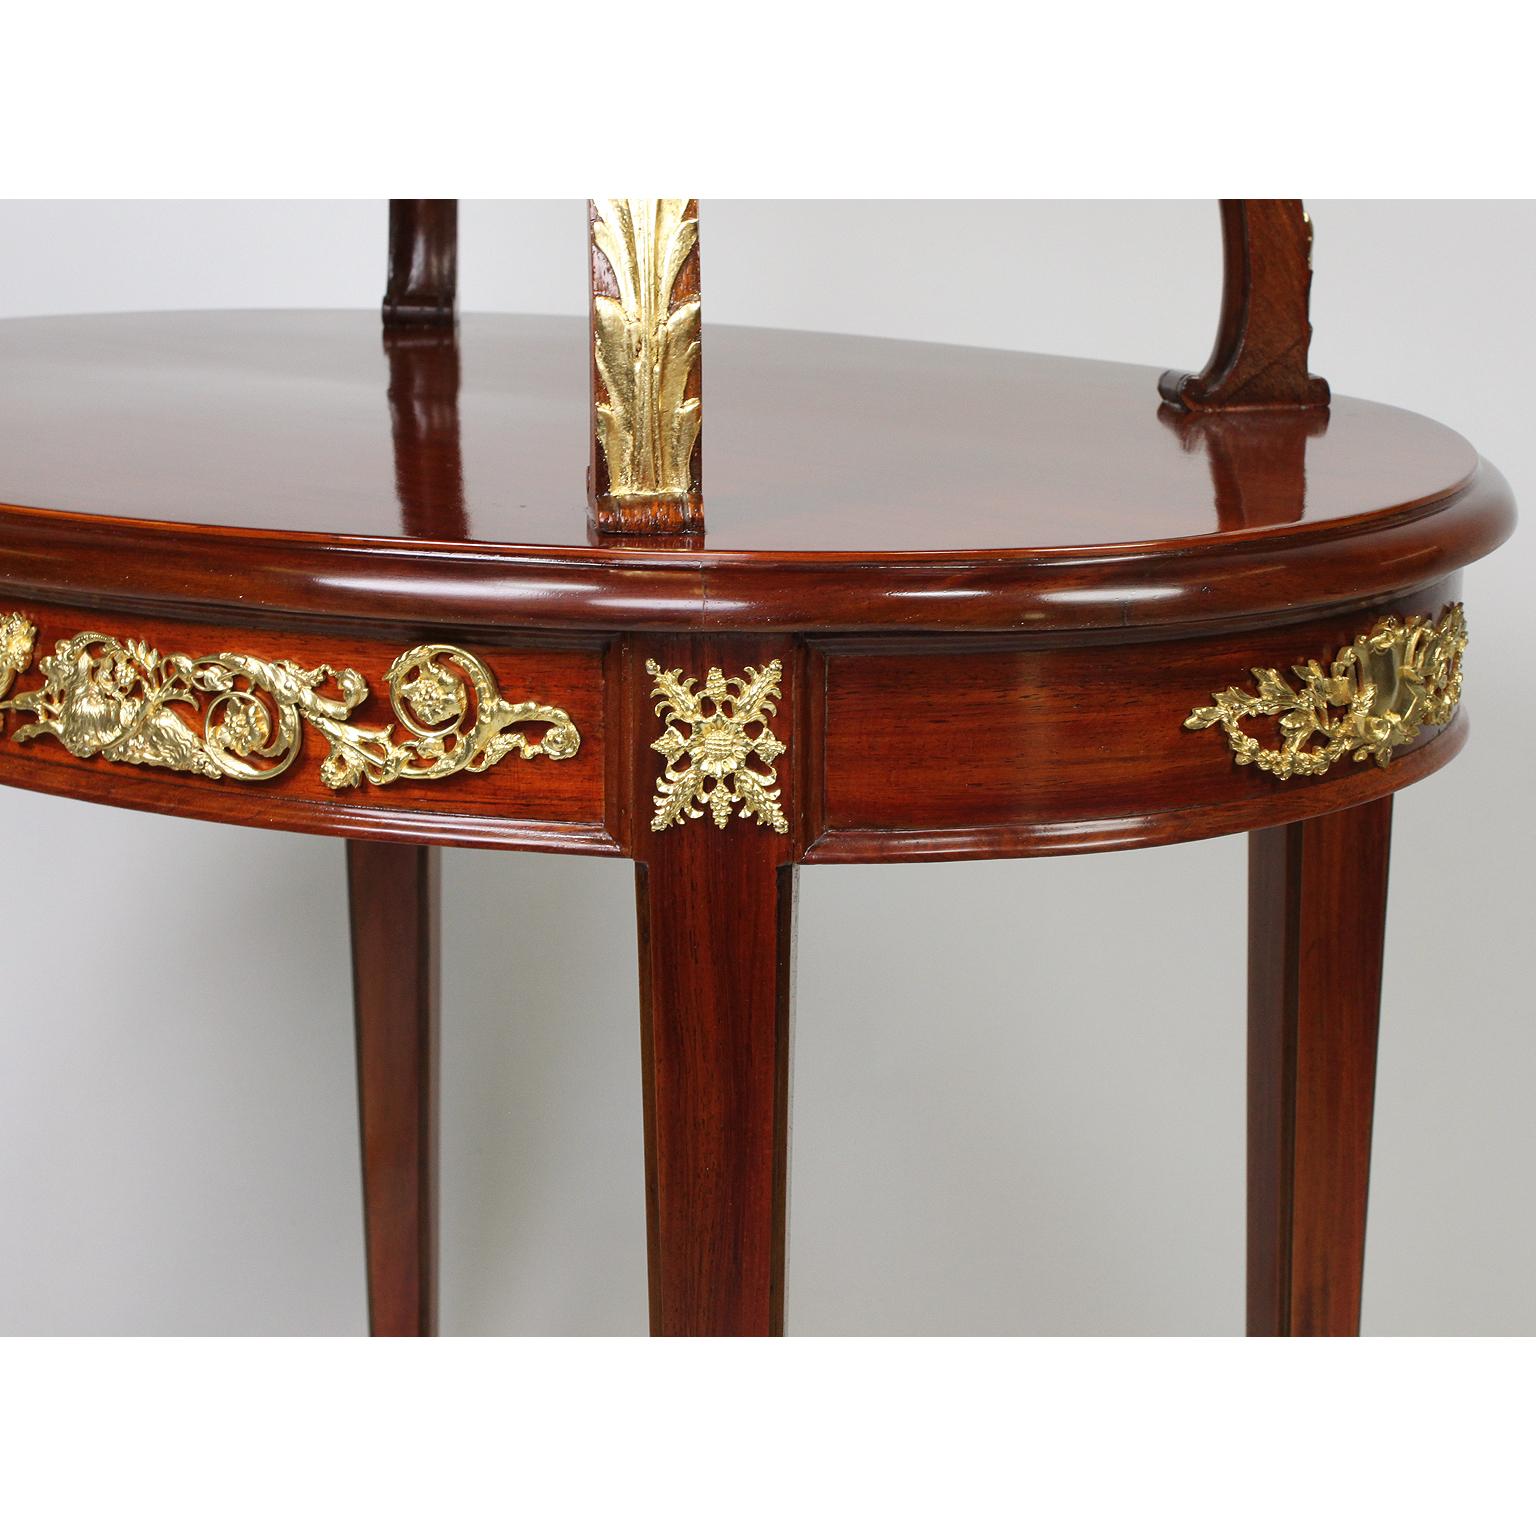 Louis XVI Style Mahogany and Ormolu Mounted 2-Tier Dessert Table by P. E. Guerin For Sale 3